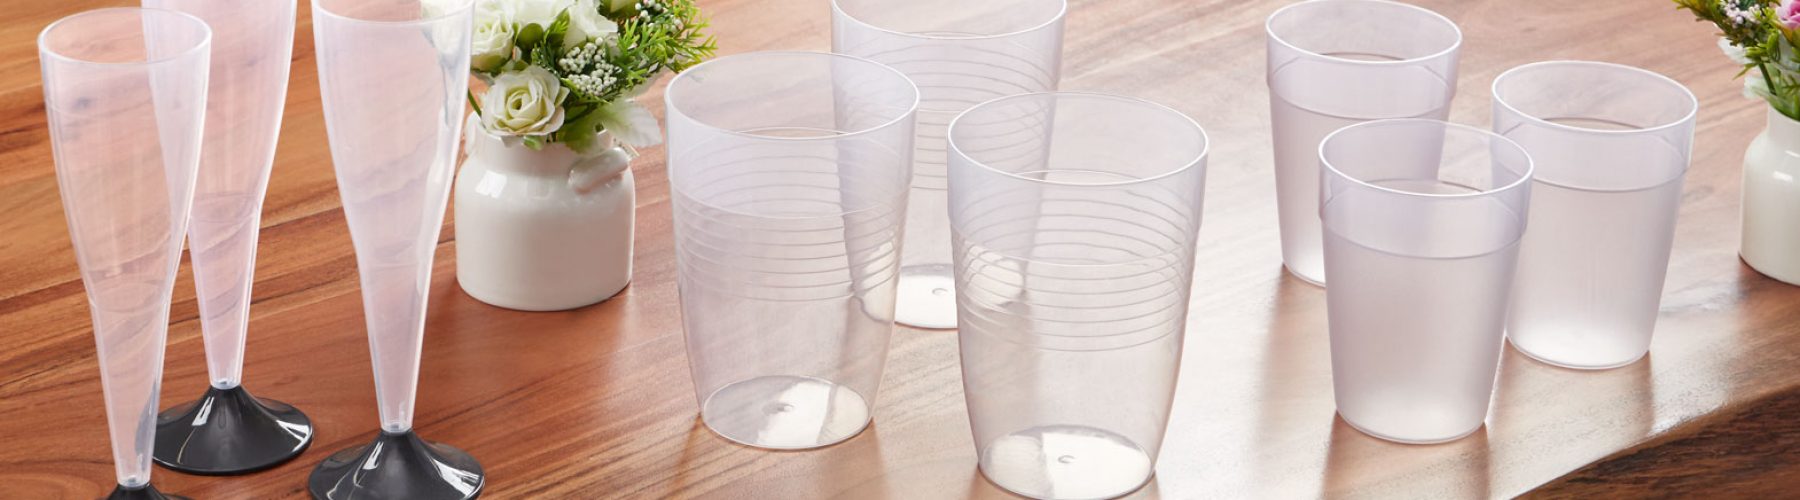 reusable-dishes_drinking-cups-header_10_21_03106-1